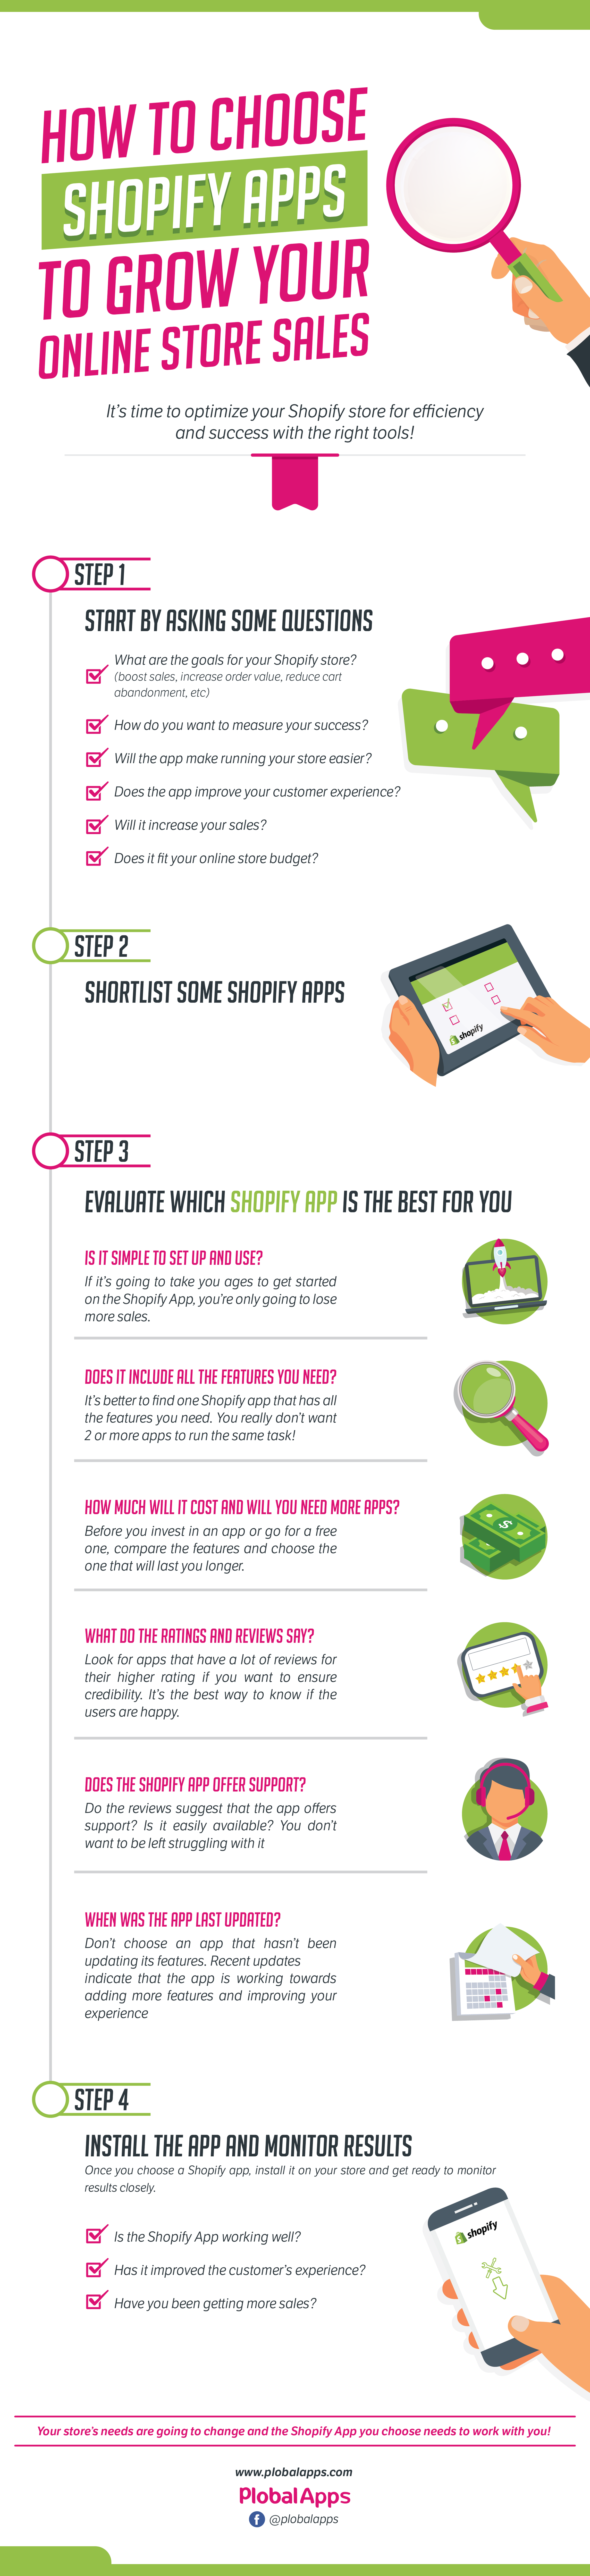 how to choose shopify apps plobal apps